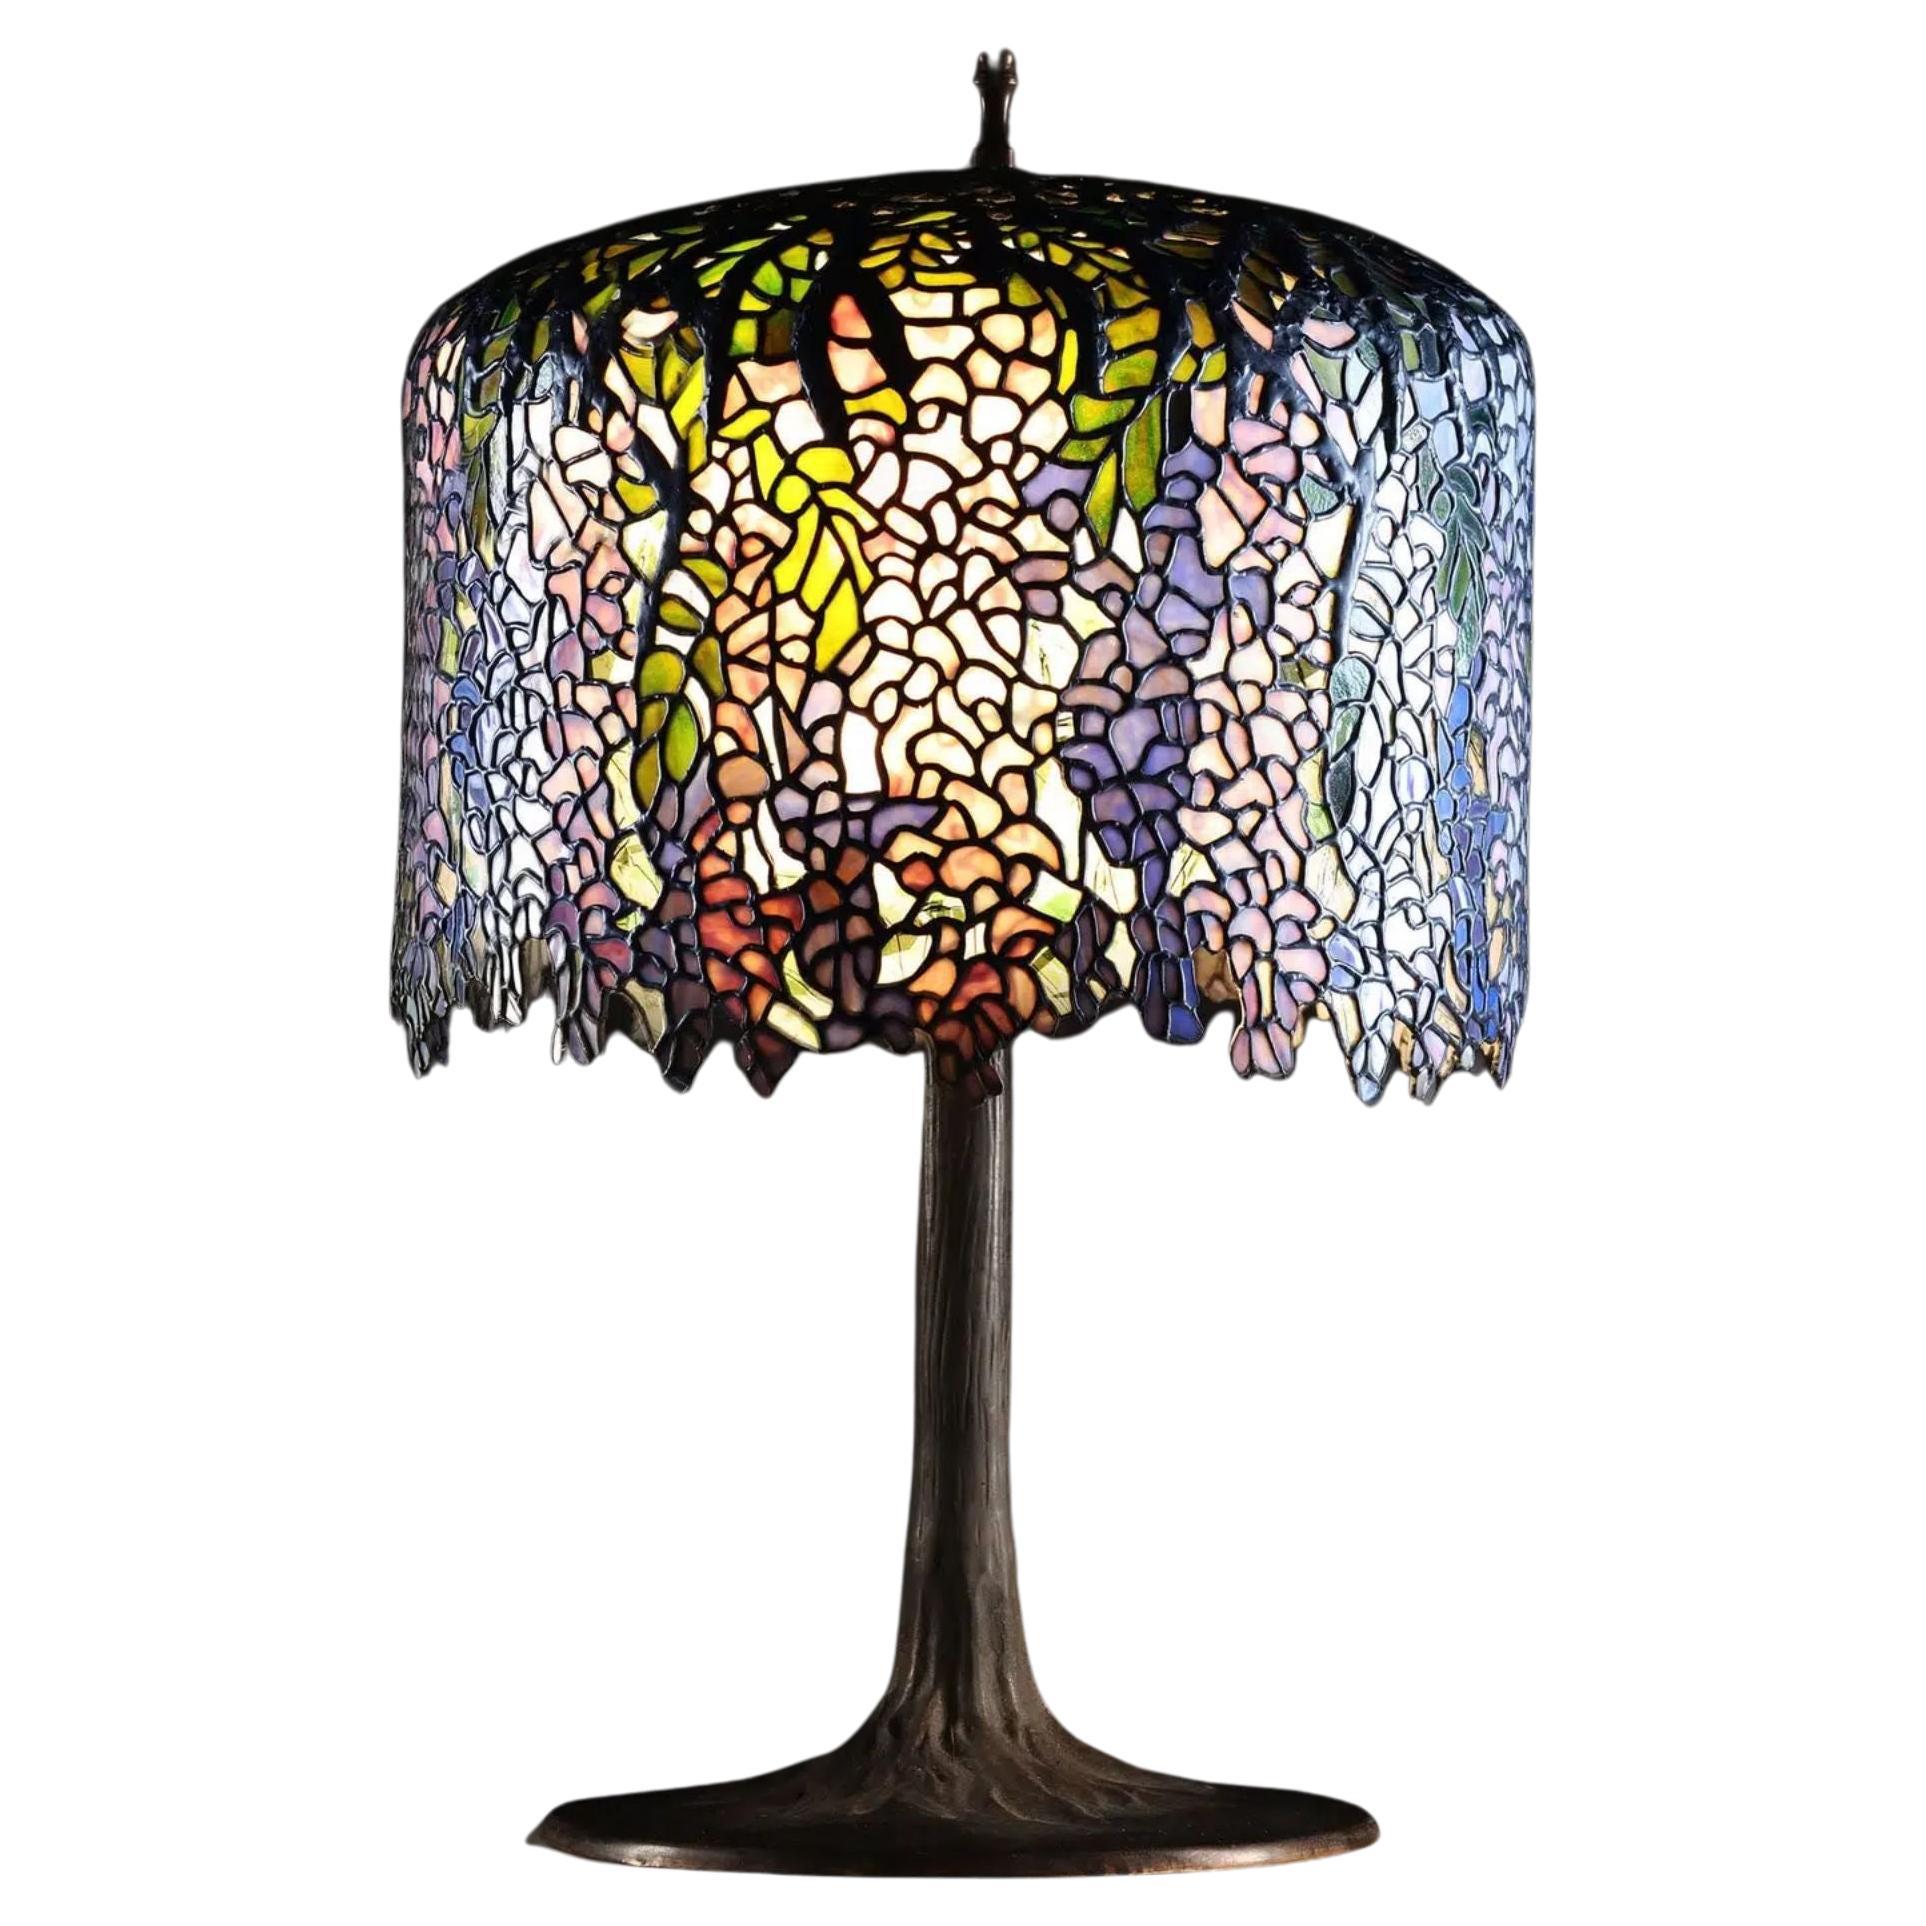 Vintage Wisteria Large Tiffany Table Lamp, 20th Century For Sale